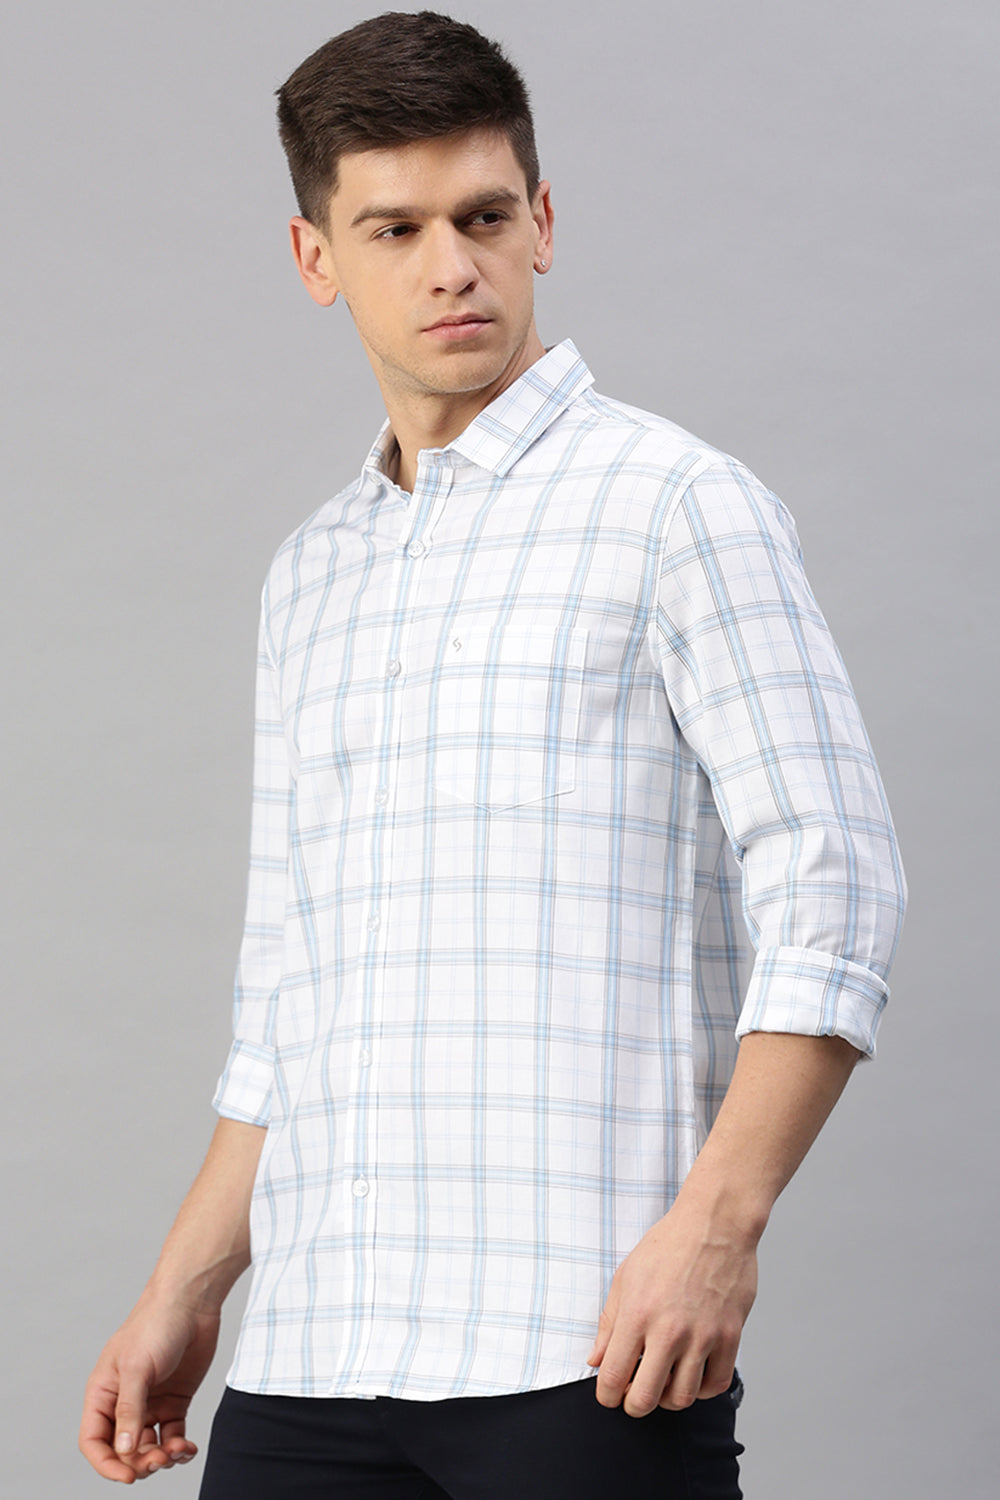 Classic Polo Men's Cotton Full Sleeve Checked Slim Fit Polo Neck White Color Woven Shirt | So1-95 A